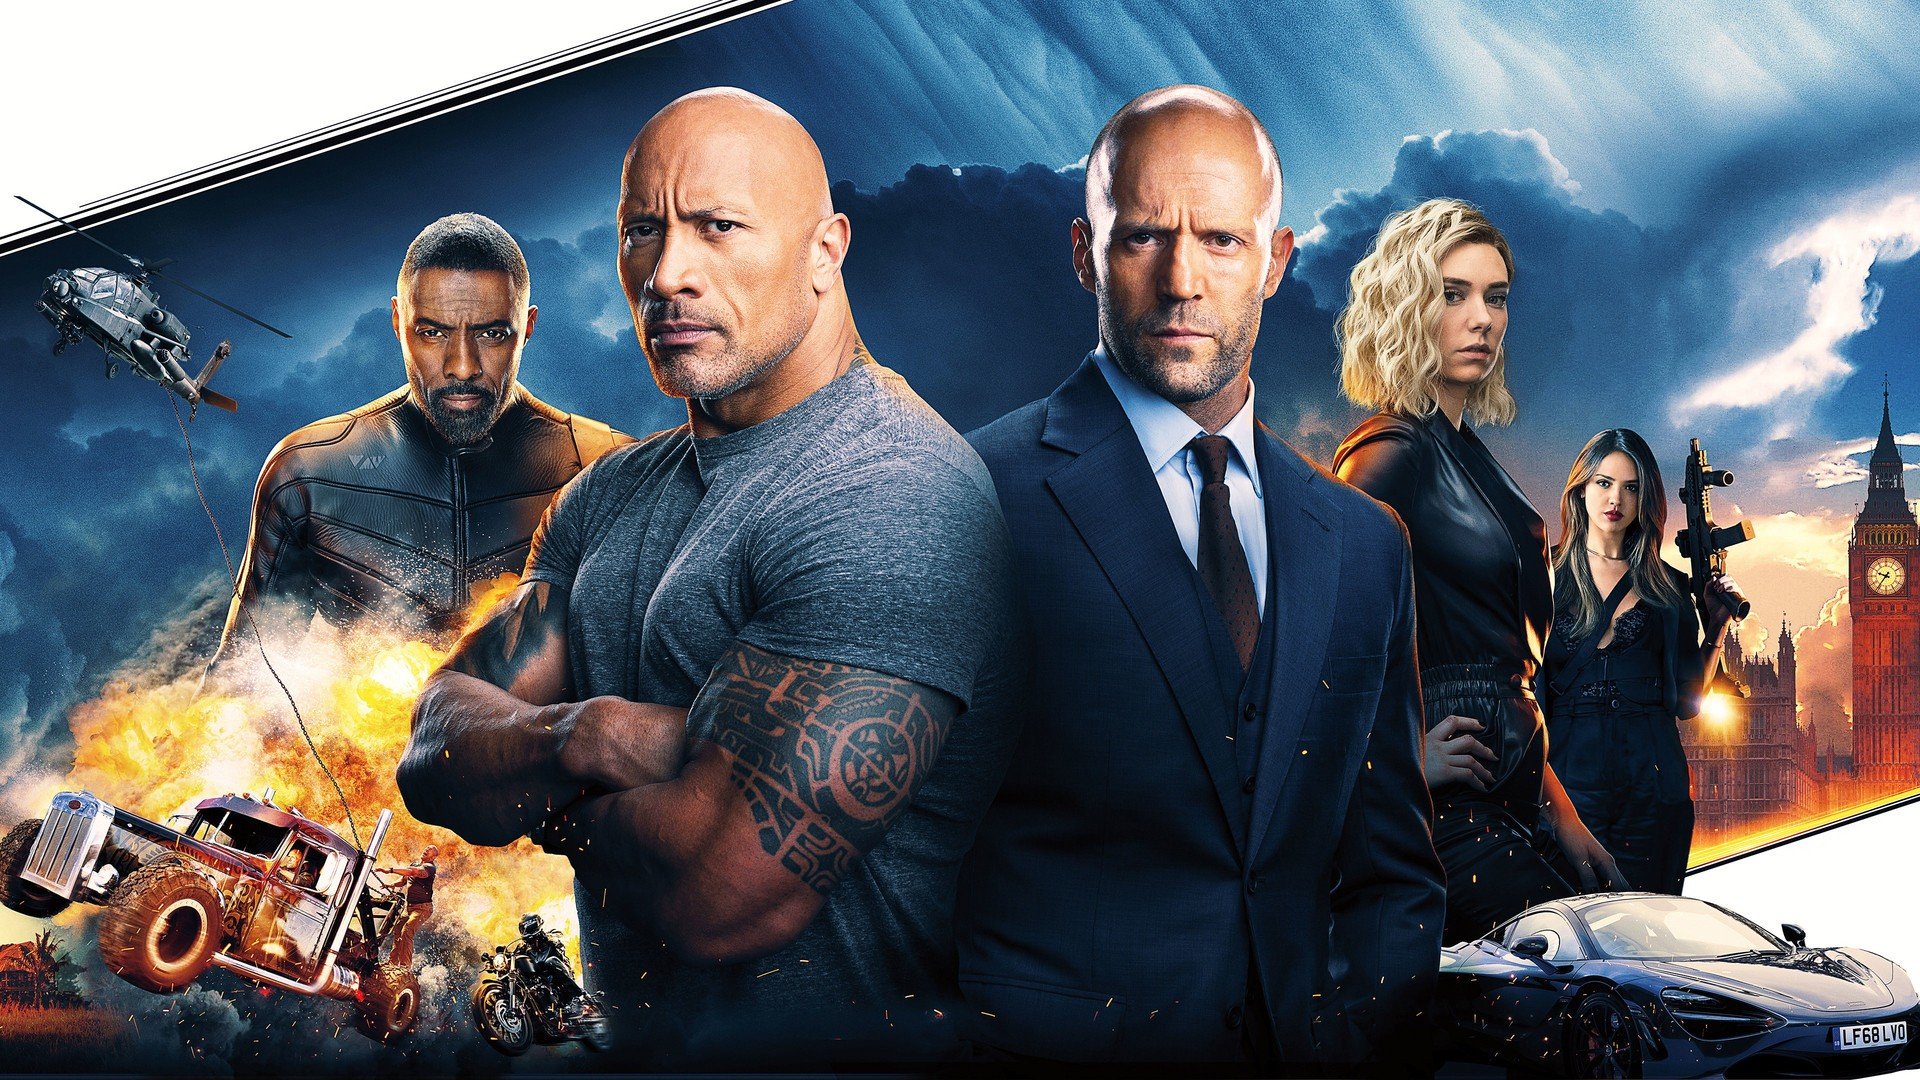 Fast & Furious Presents: Hobbs & Shaw (2019) HDRip Now Available on...